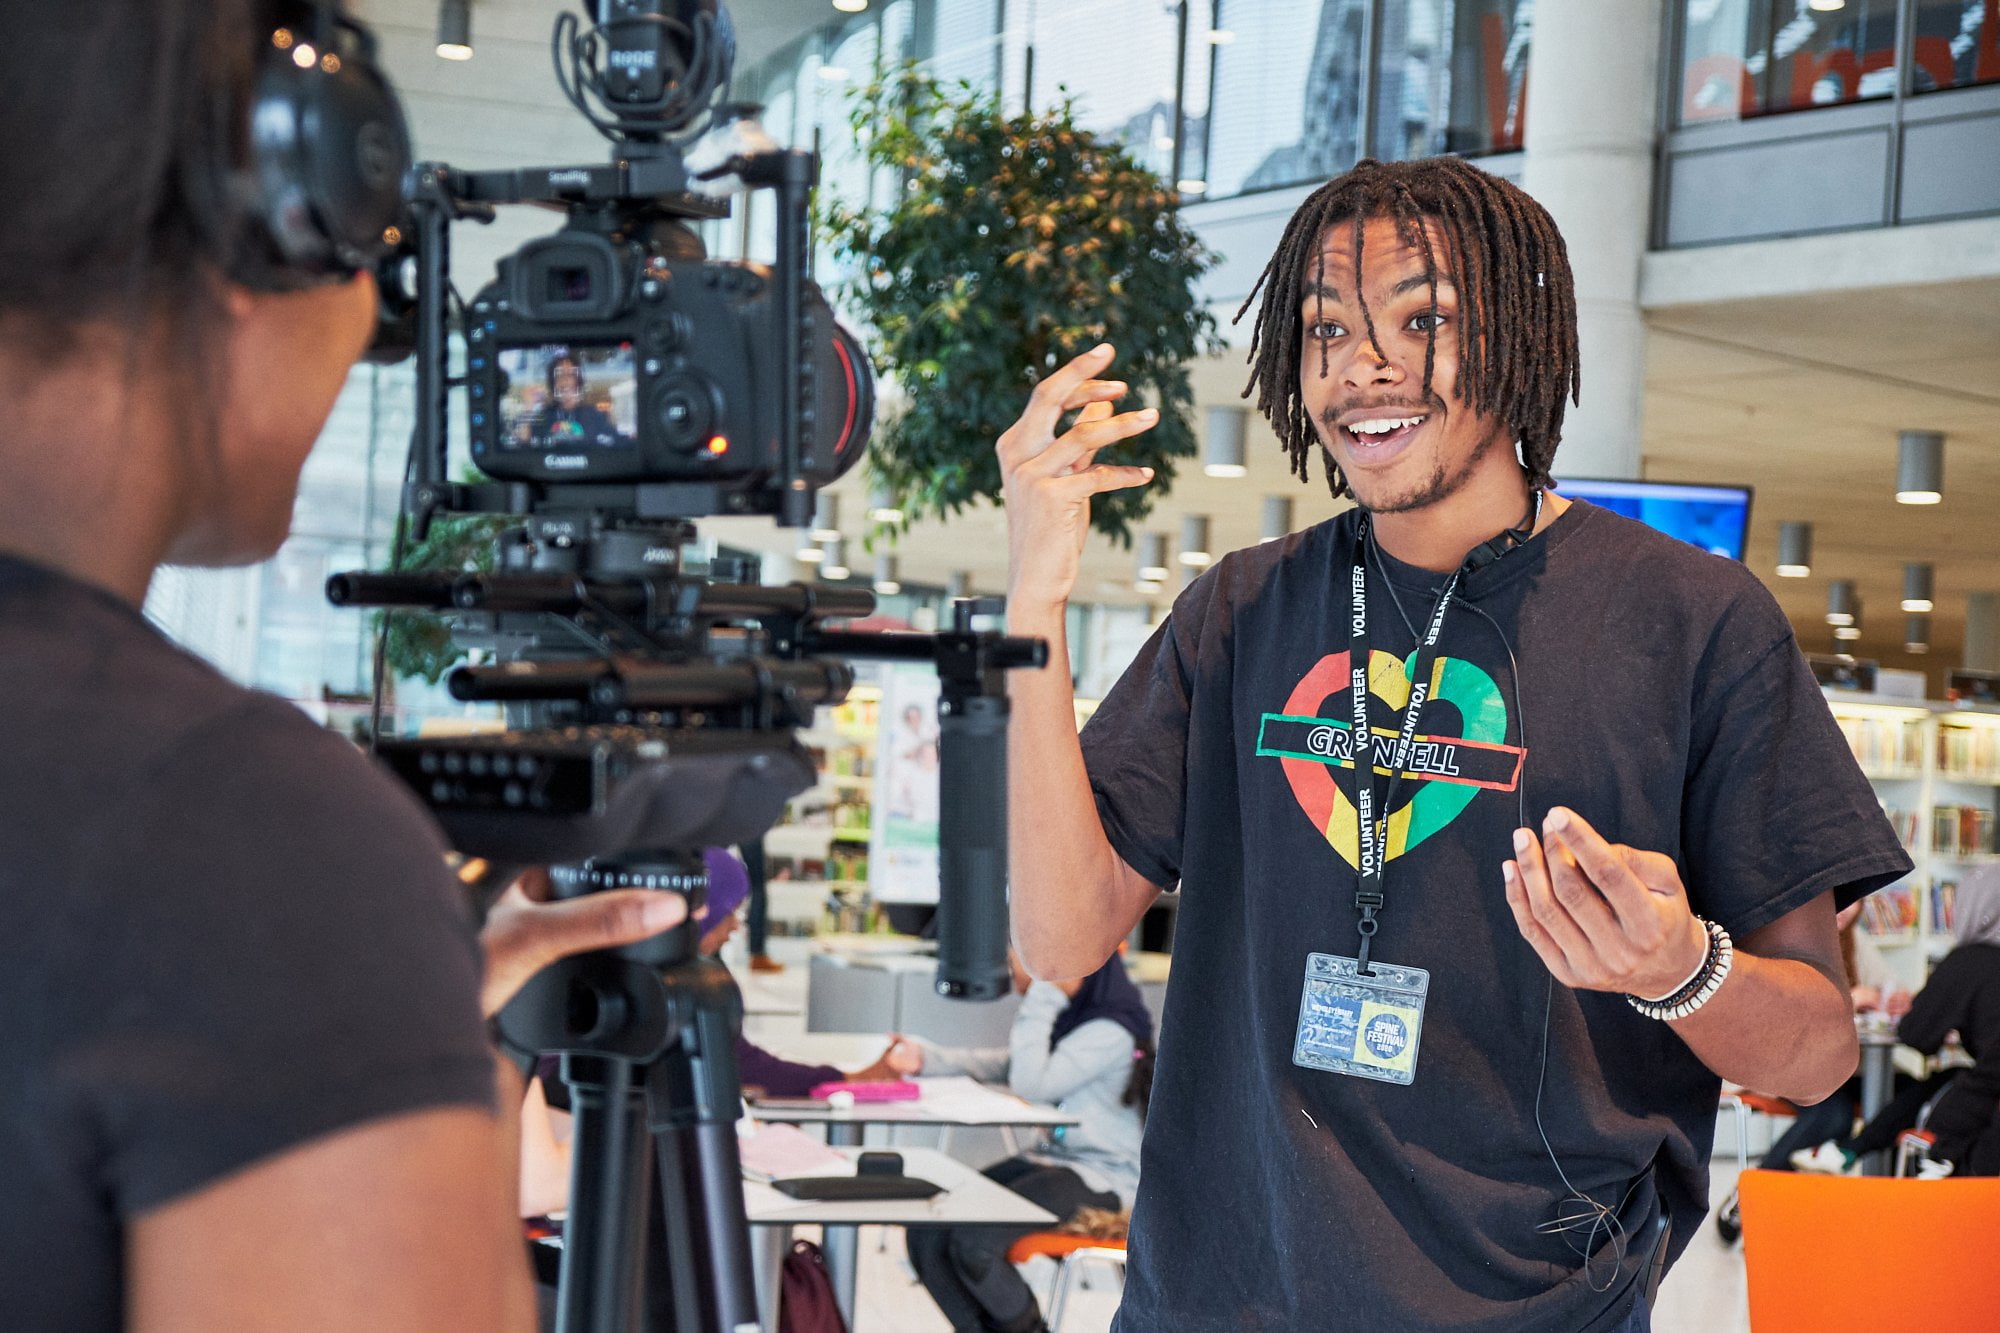 Young man with locks smiles and gesticulates while being filmed